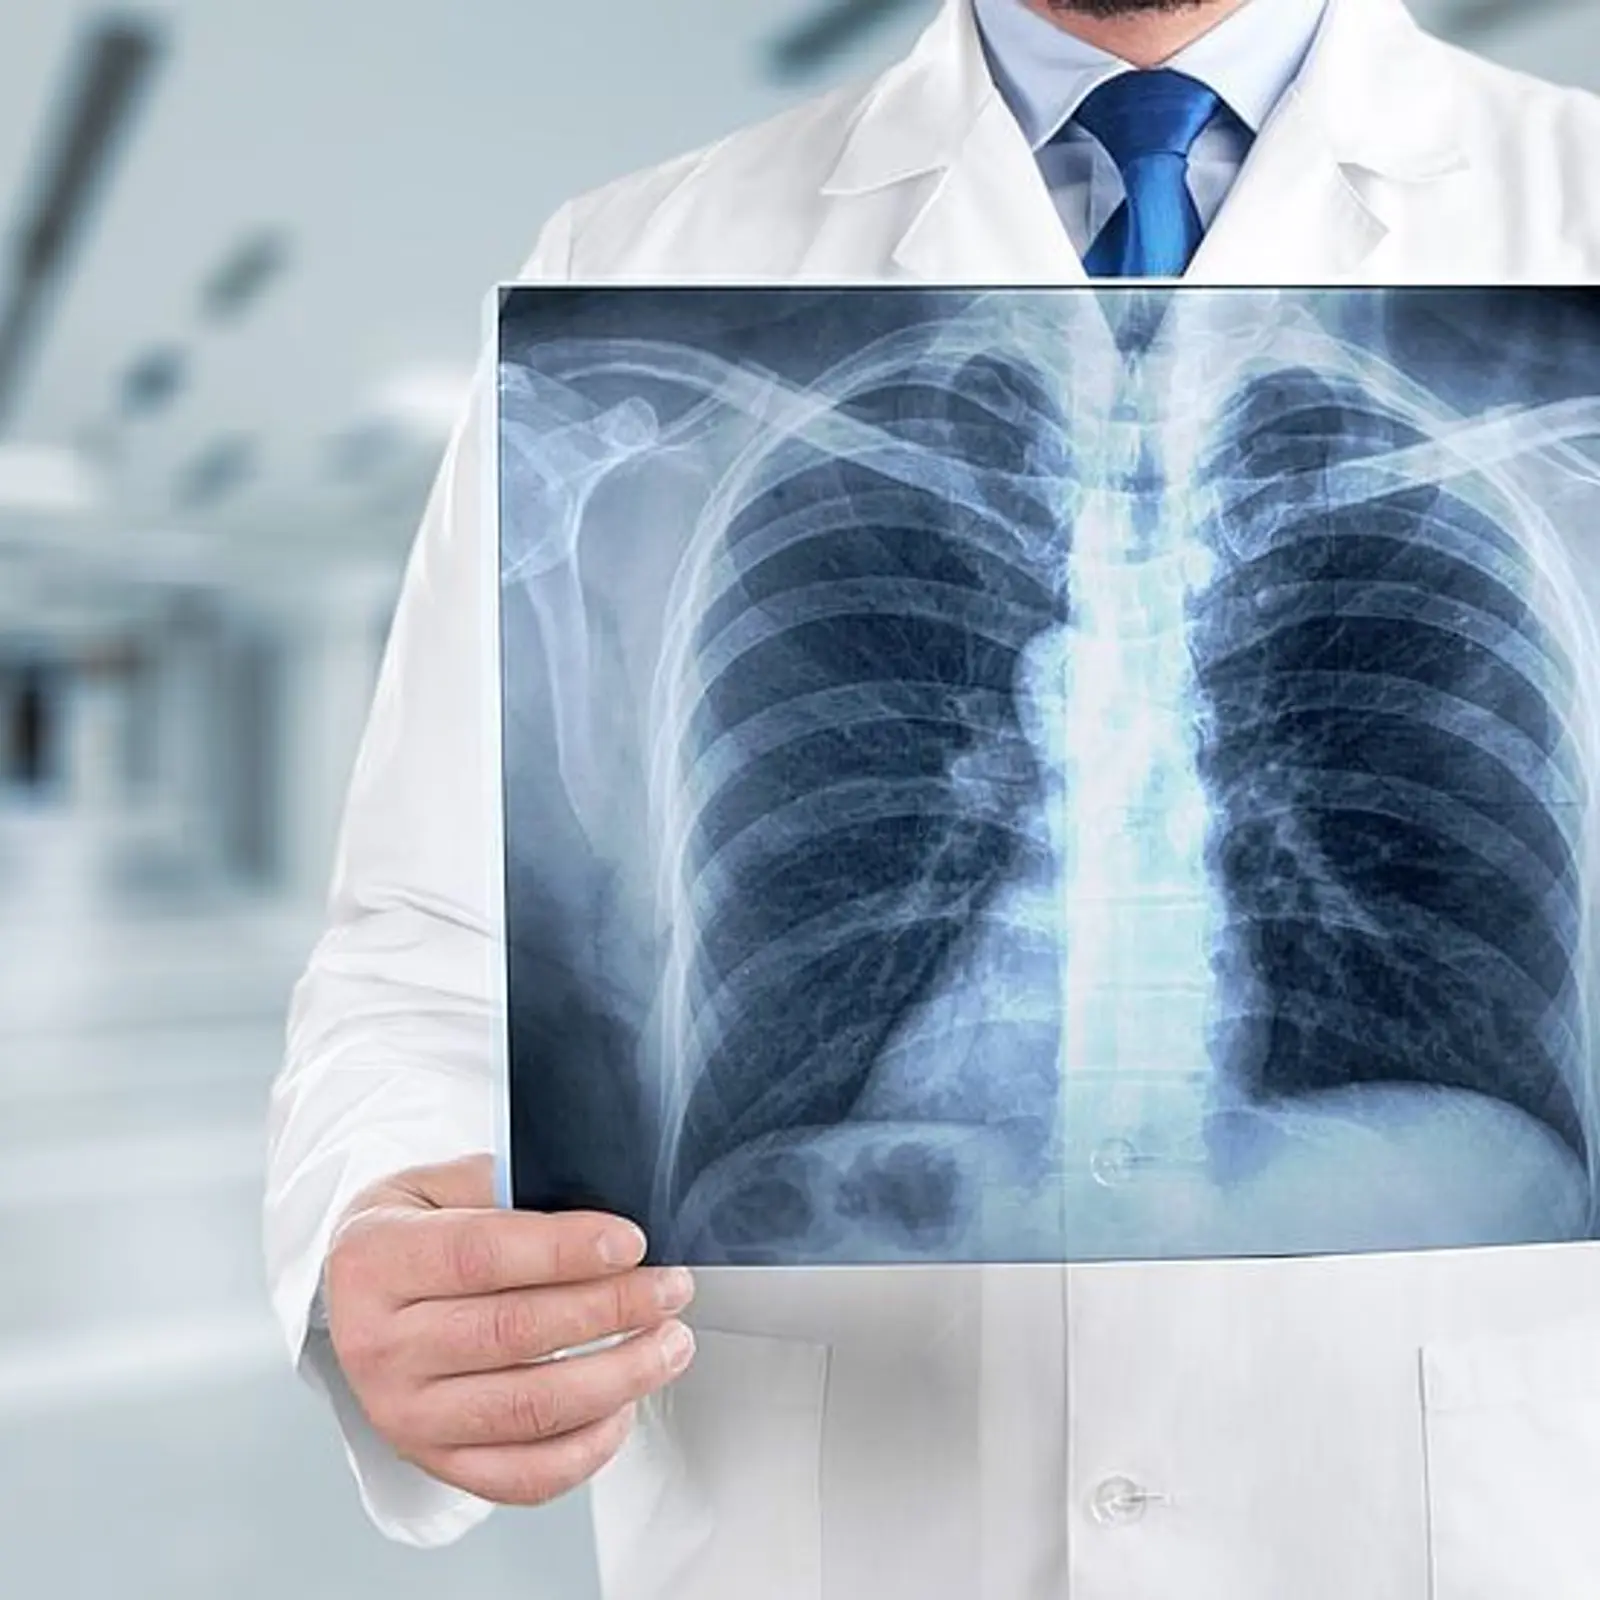 How to Get an X-Ray Without a Referral